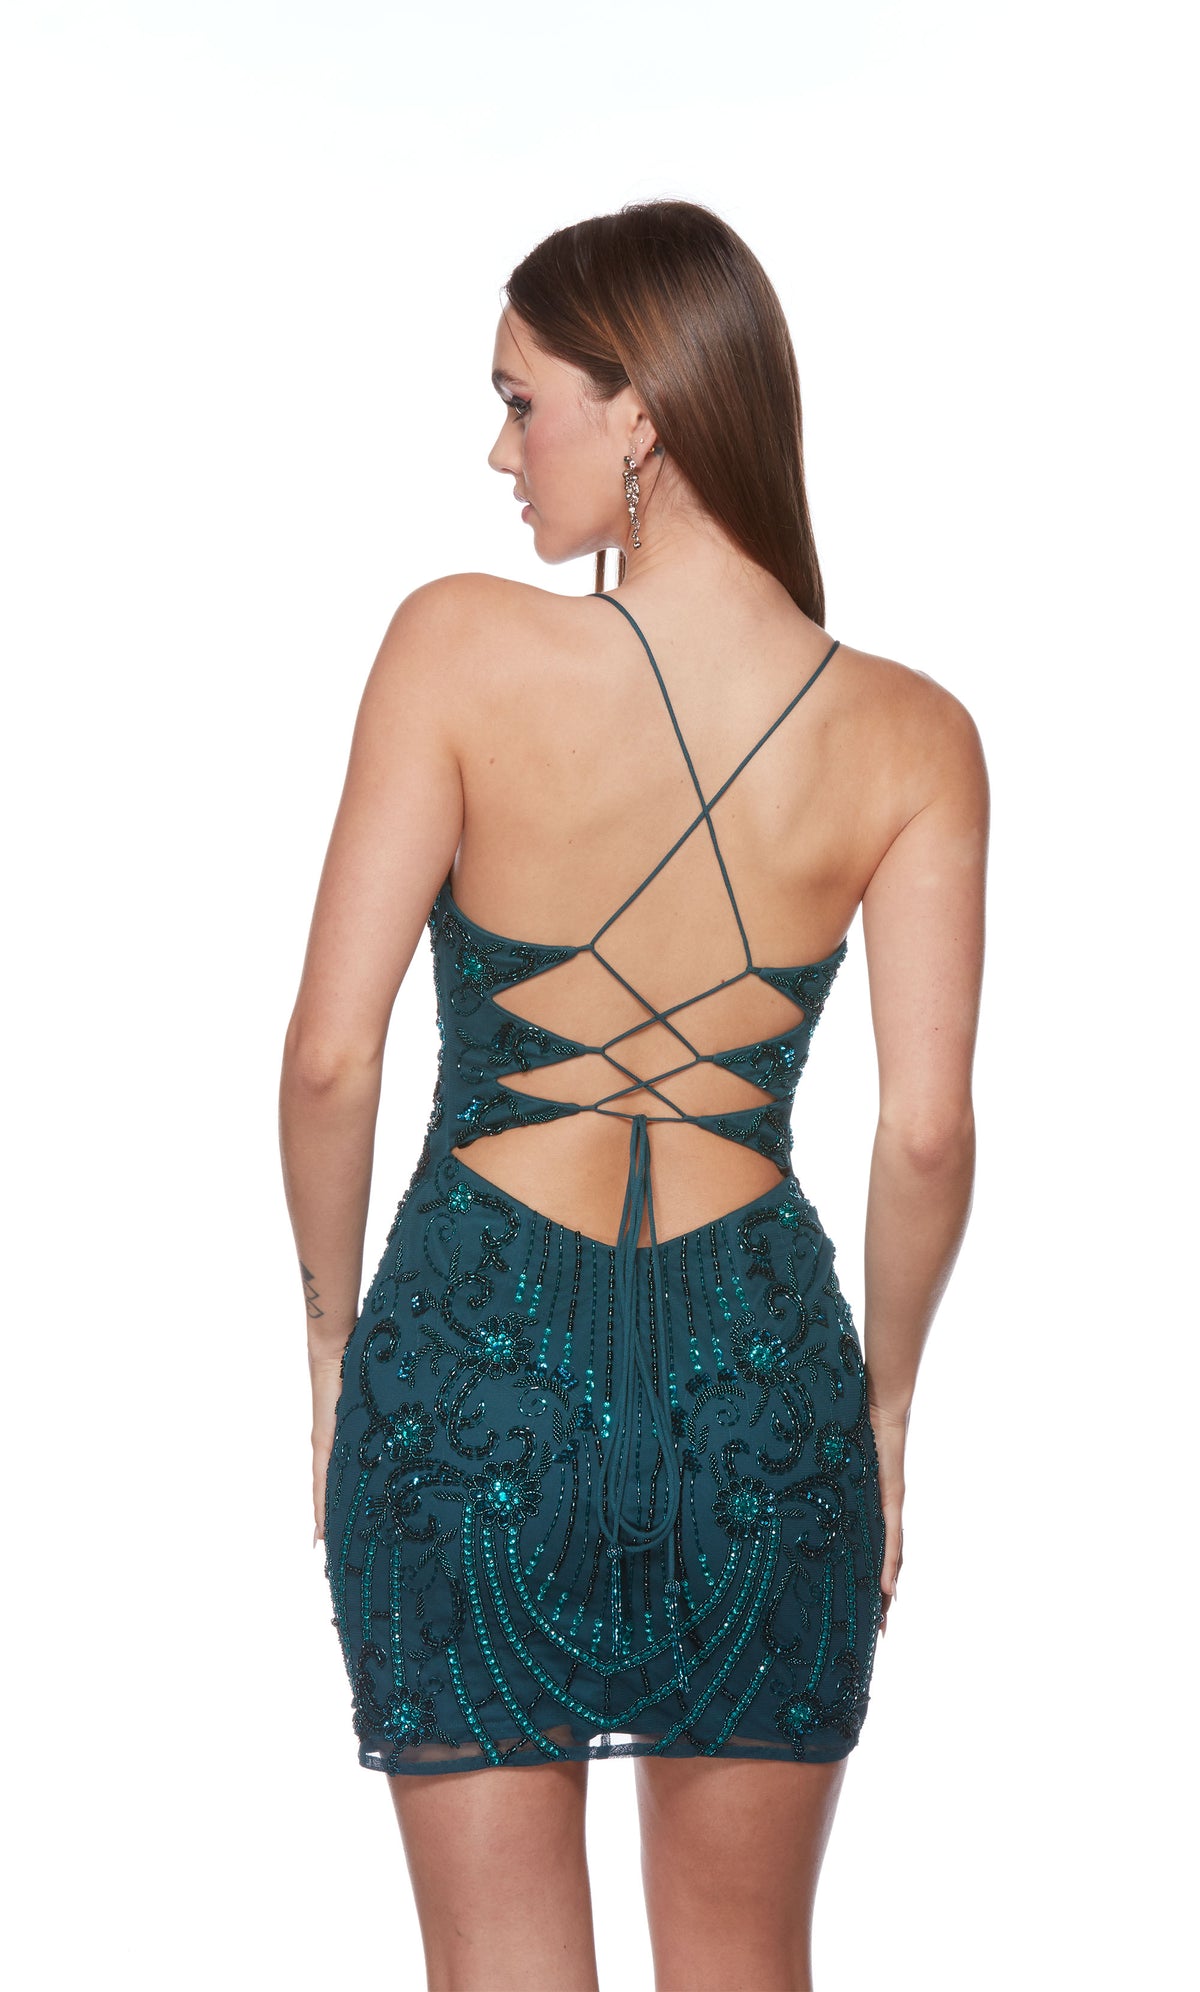 A dragonfly (blue-green) colored, hand beaded mini dress with a strappy back.